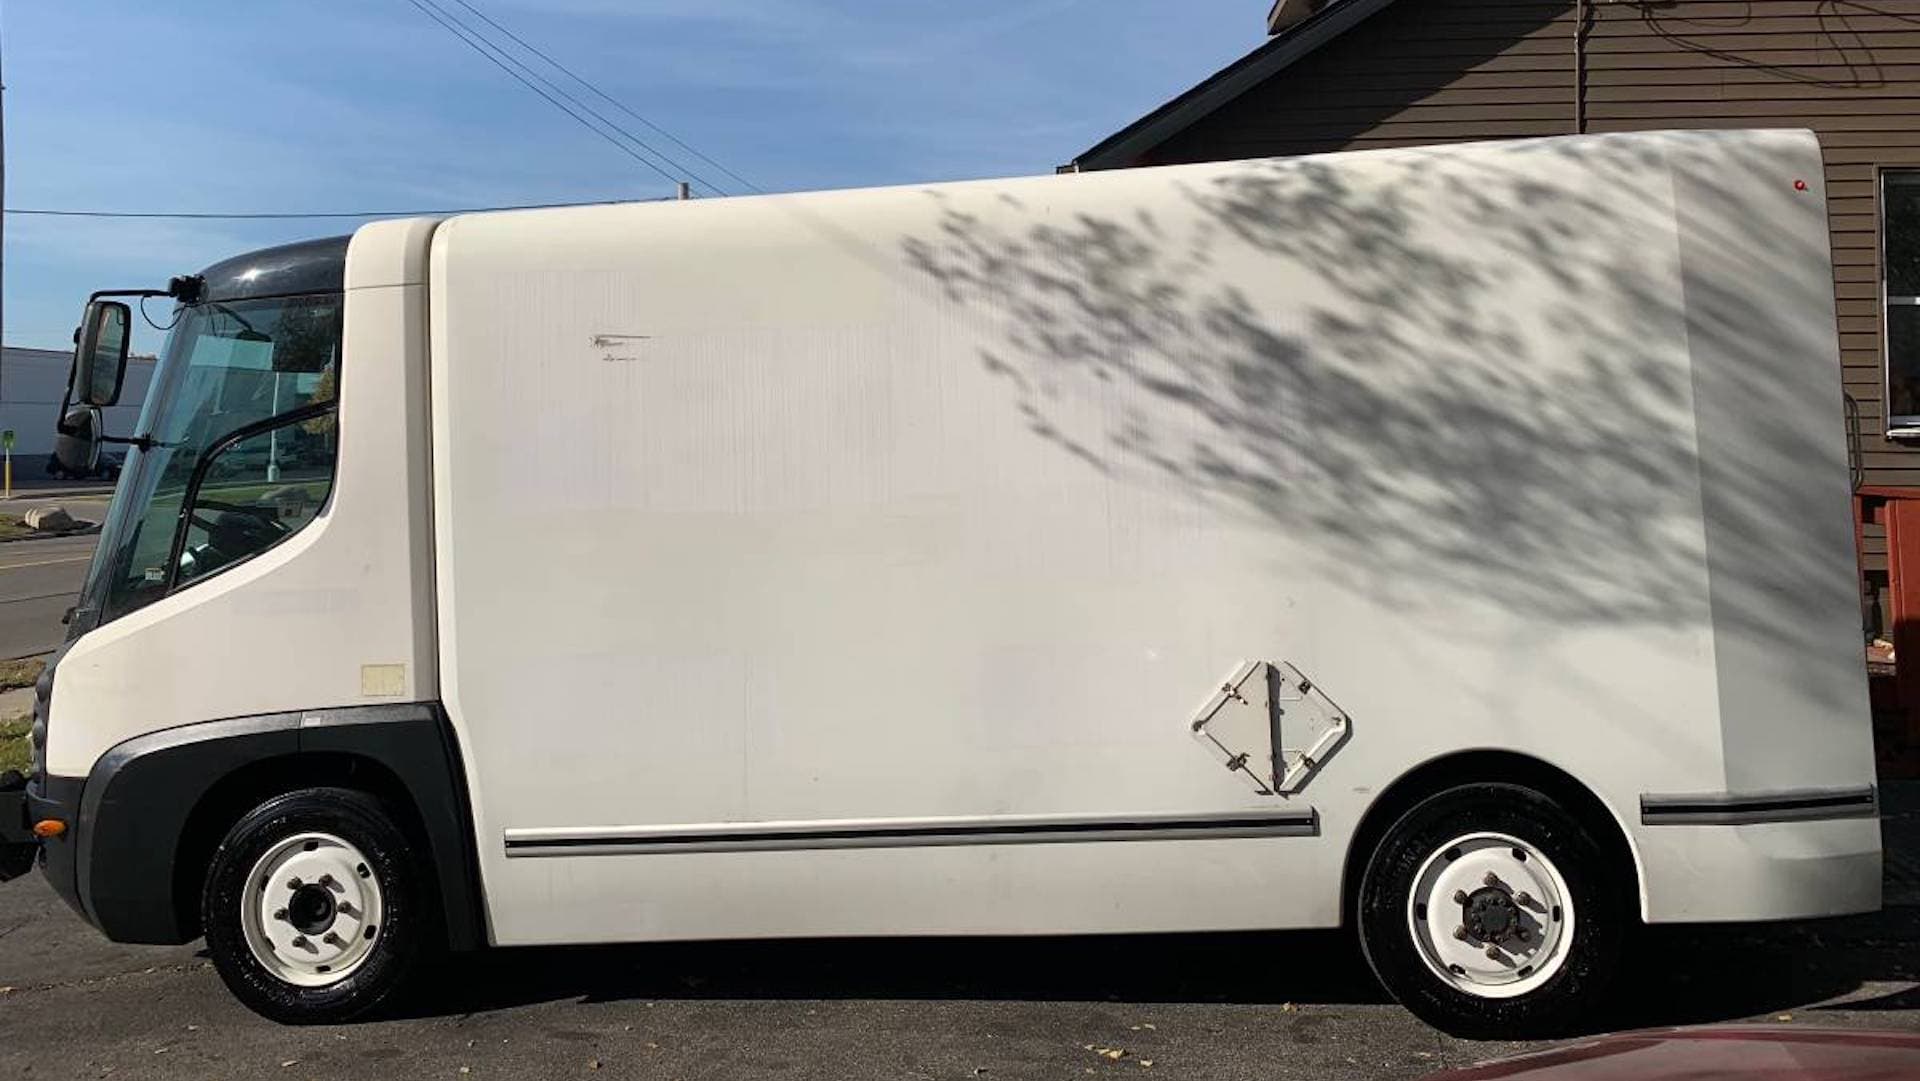 What Would You Do With This Funky Electric Cargo Van That’s for Sale on Craigslist?